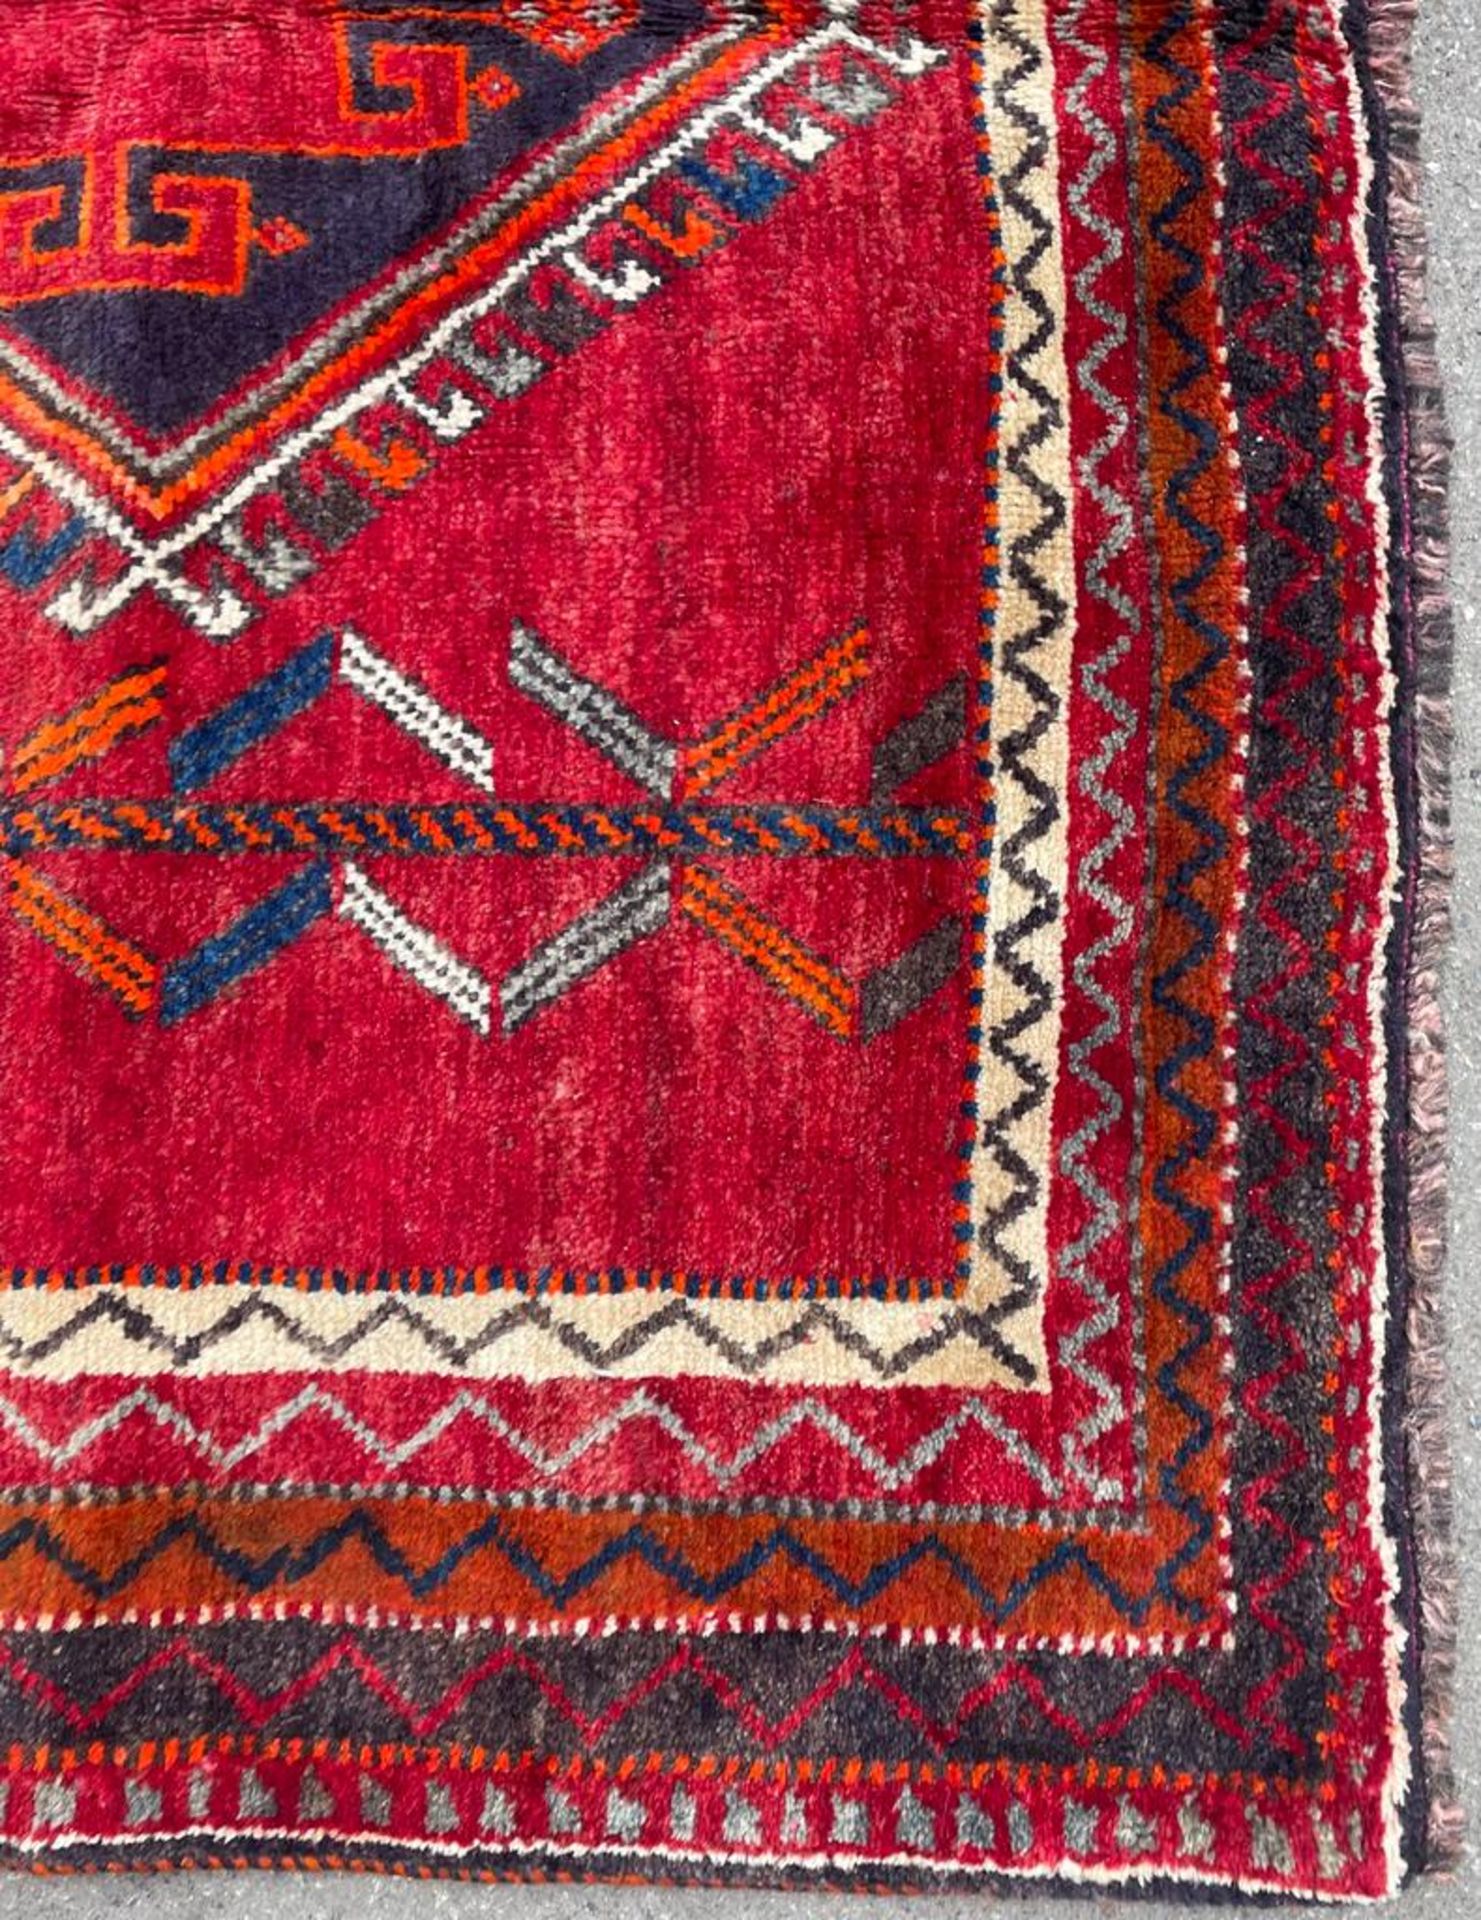 A 20th century South West Persian Islamic Lori floor carpet rug having a central red panel with - Image 3 of 4